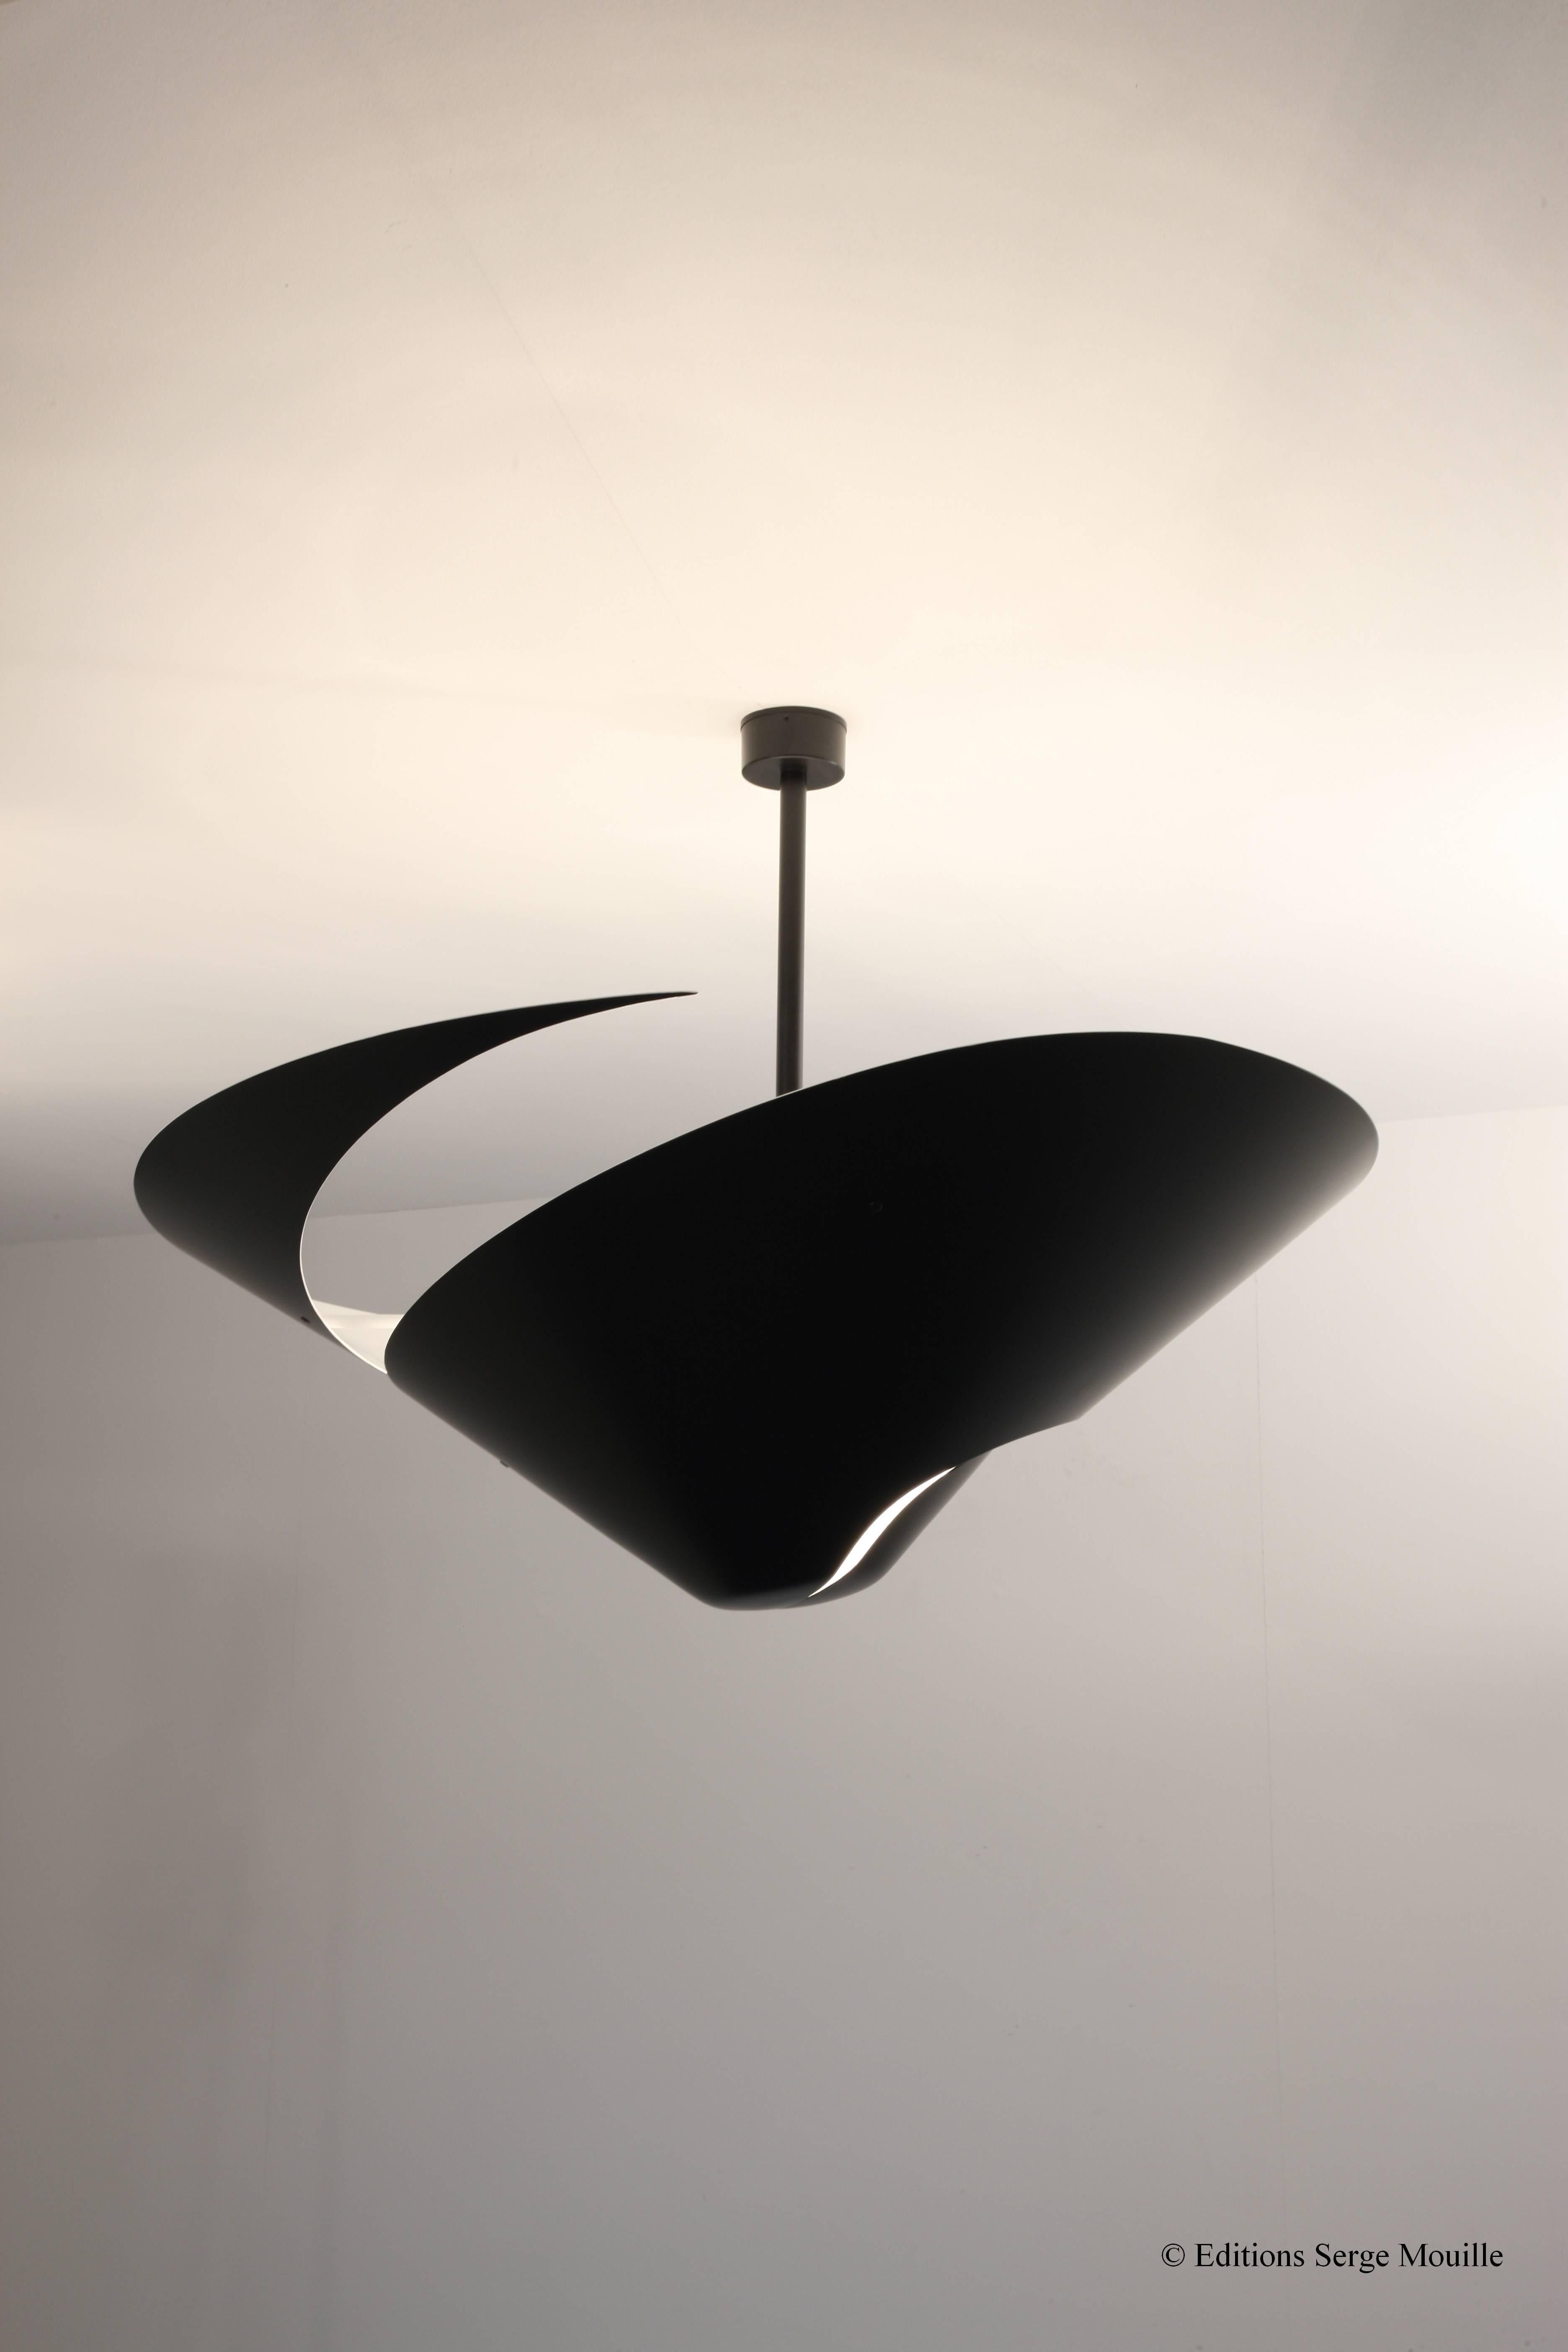 Designed in 1955 for the French airforce dining room. An extraordinary light sculpture, diam 93 Cm.
In black or white 
Check image 5 and image 6 



